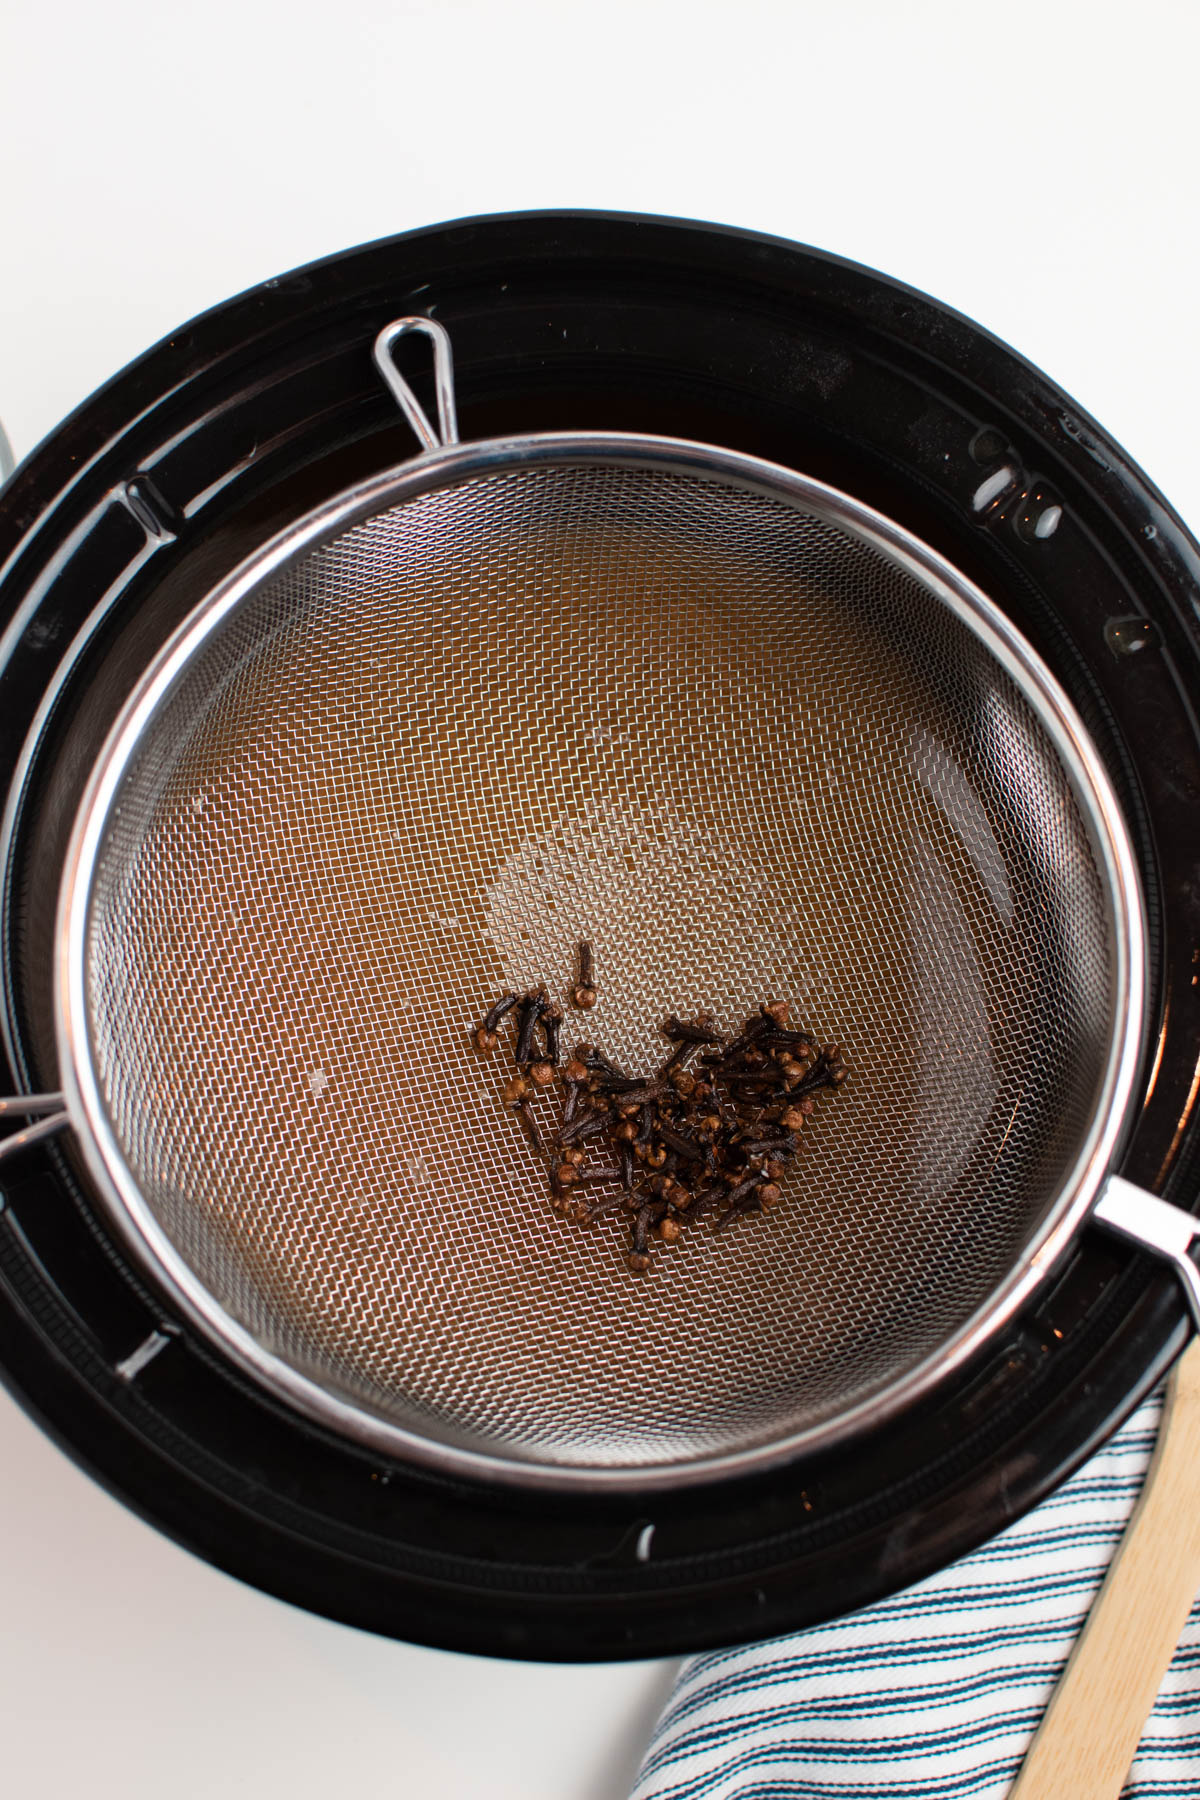 Fine mesh sieve filled with whole cloves over black slow cooker insert.